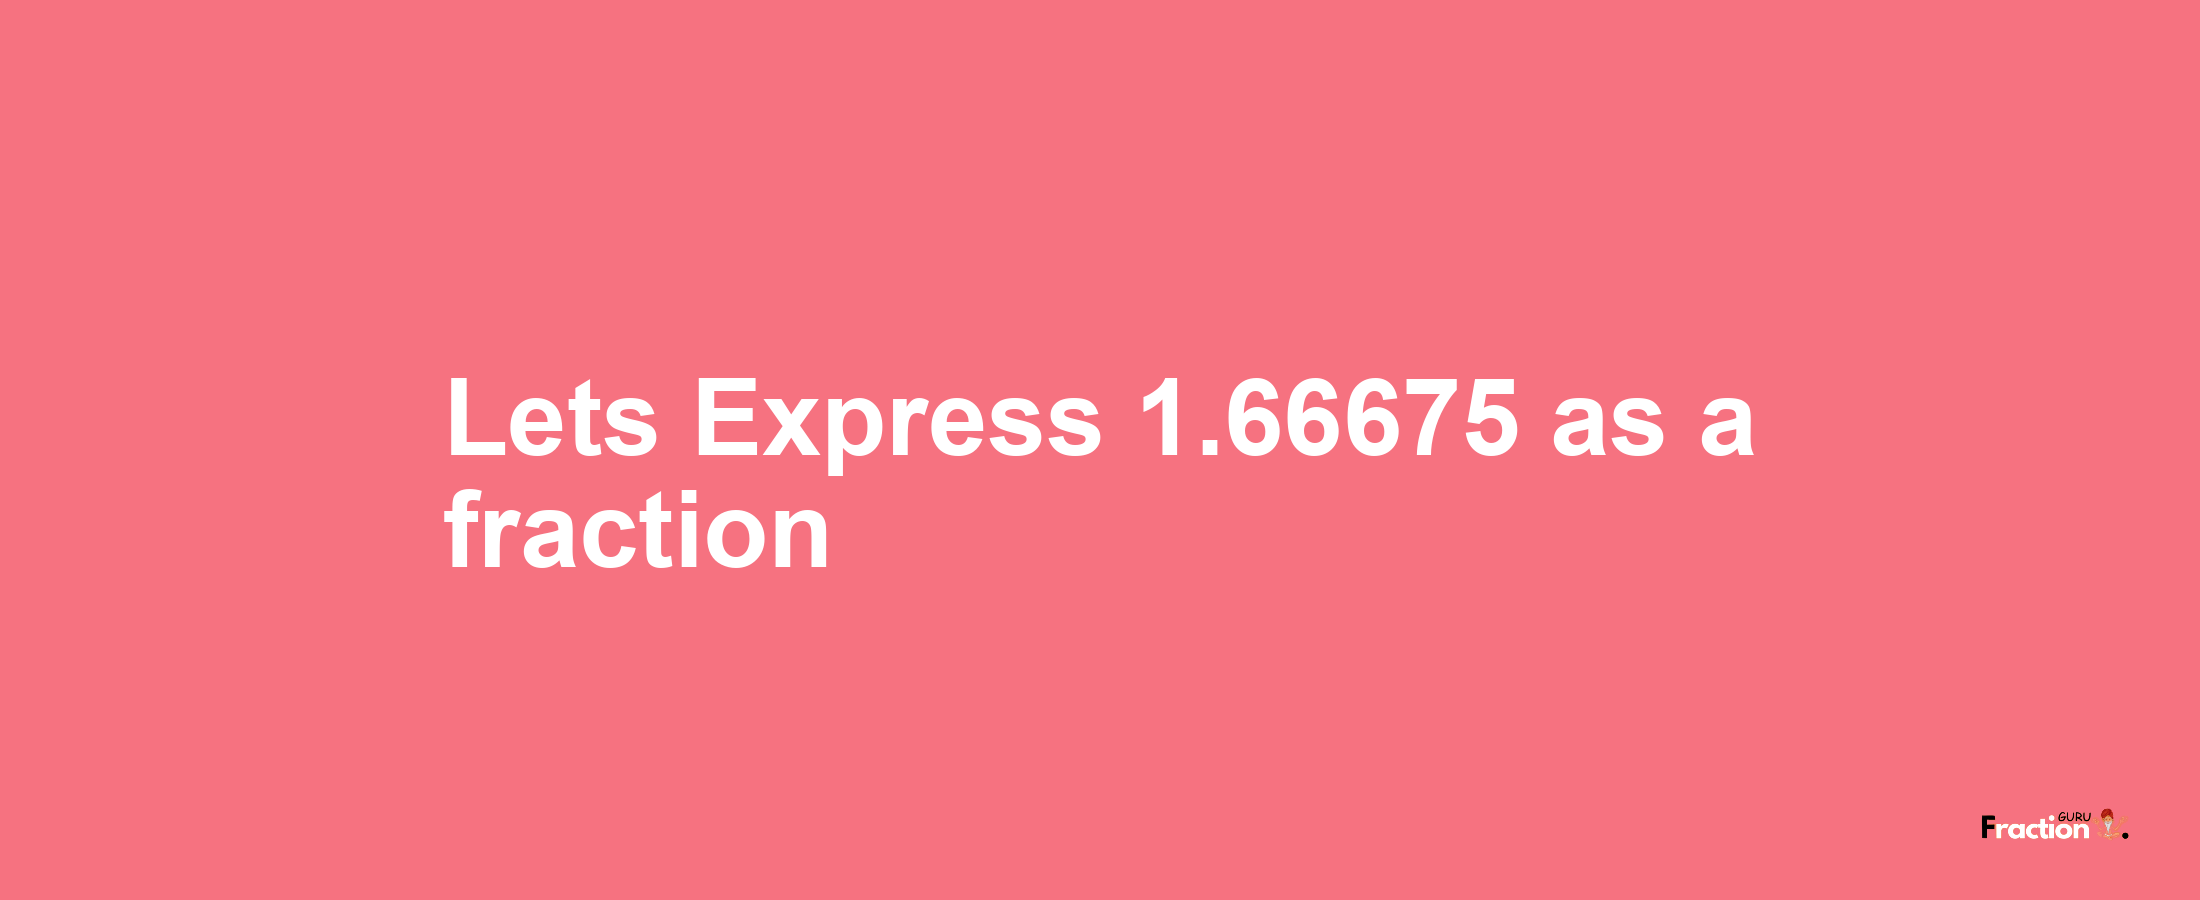 Lets Express 1.66675 as afraction